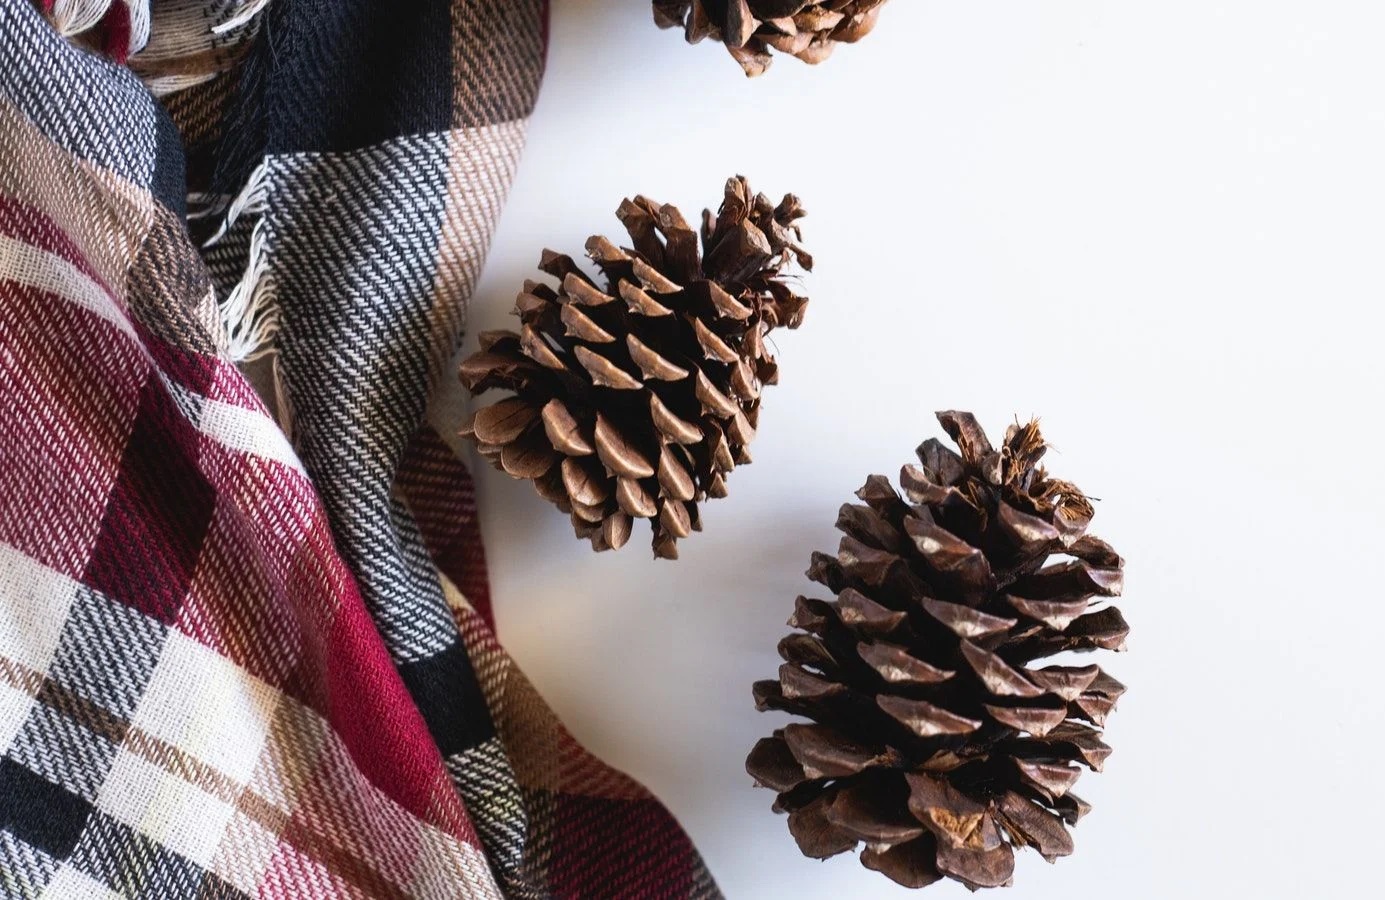 Pinecone Crafts - 14 Pinecone Art Ideas to Try Today